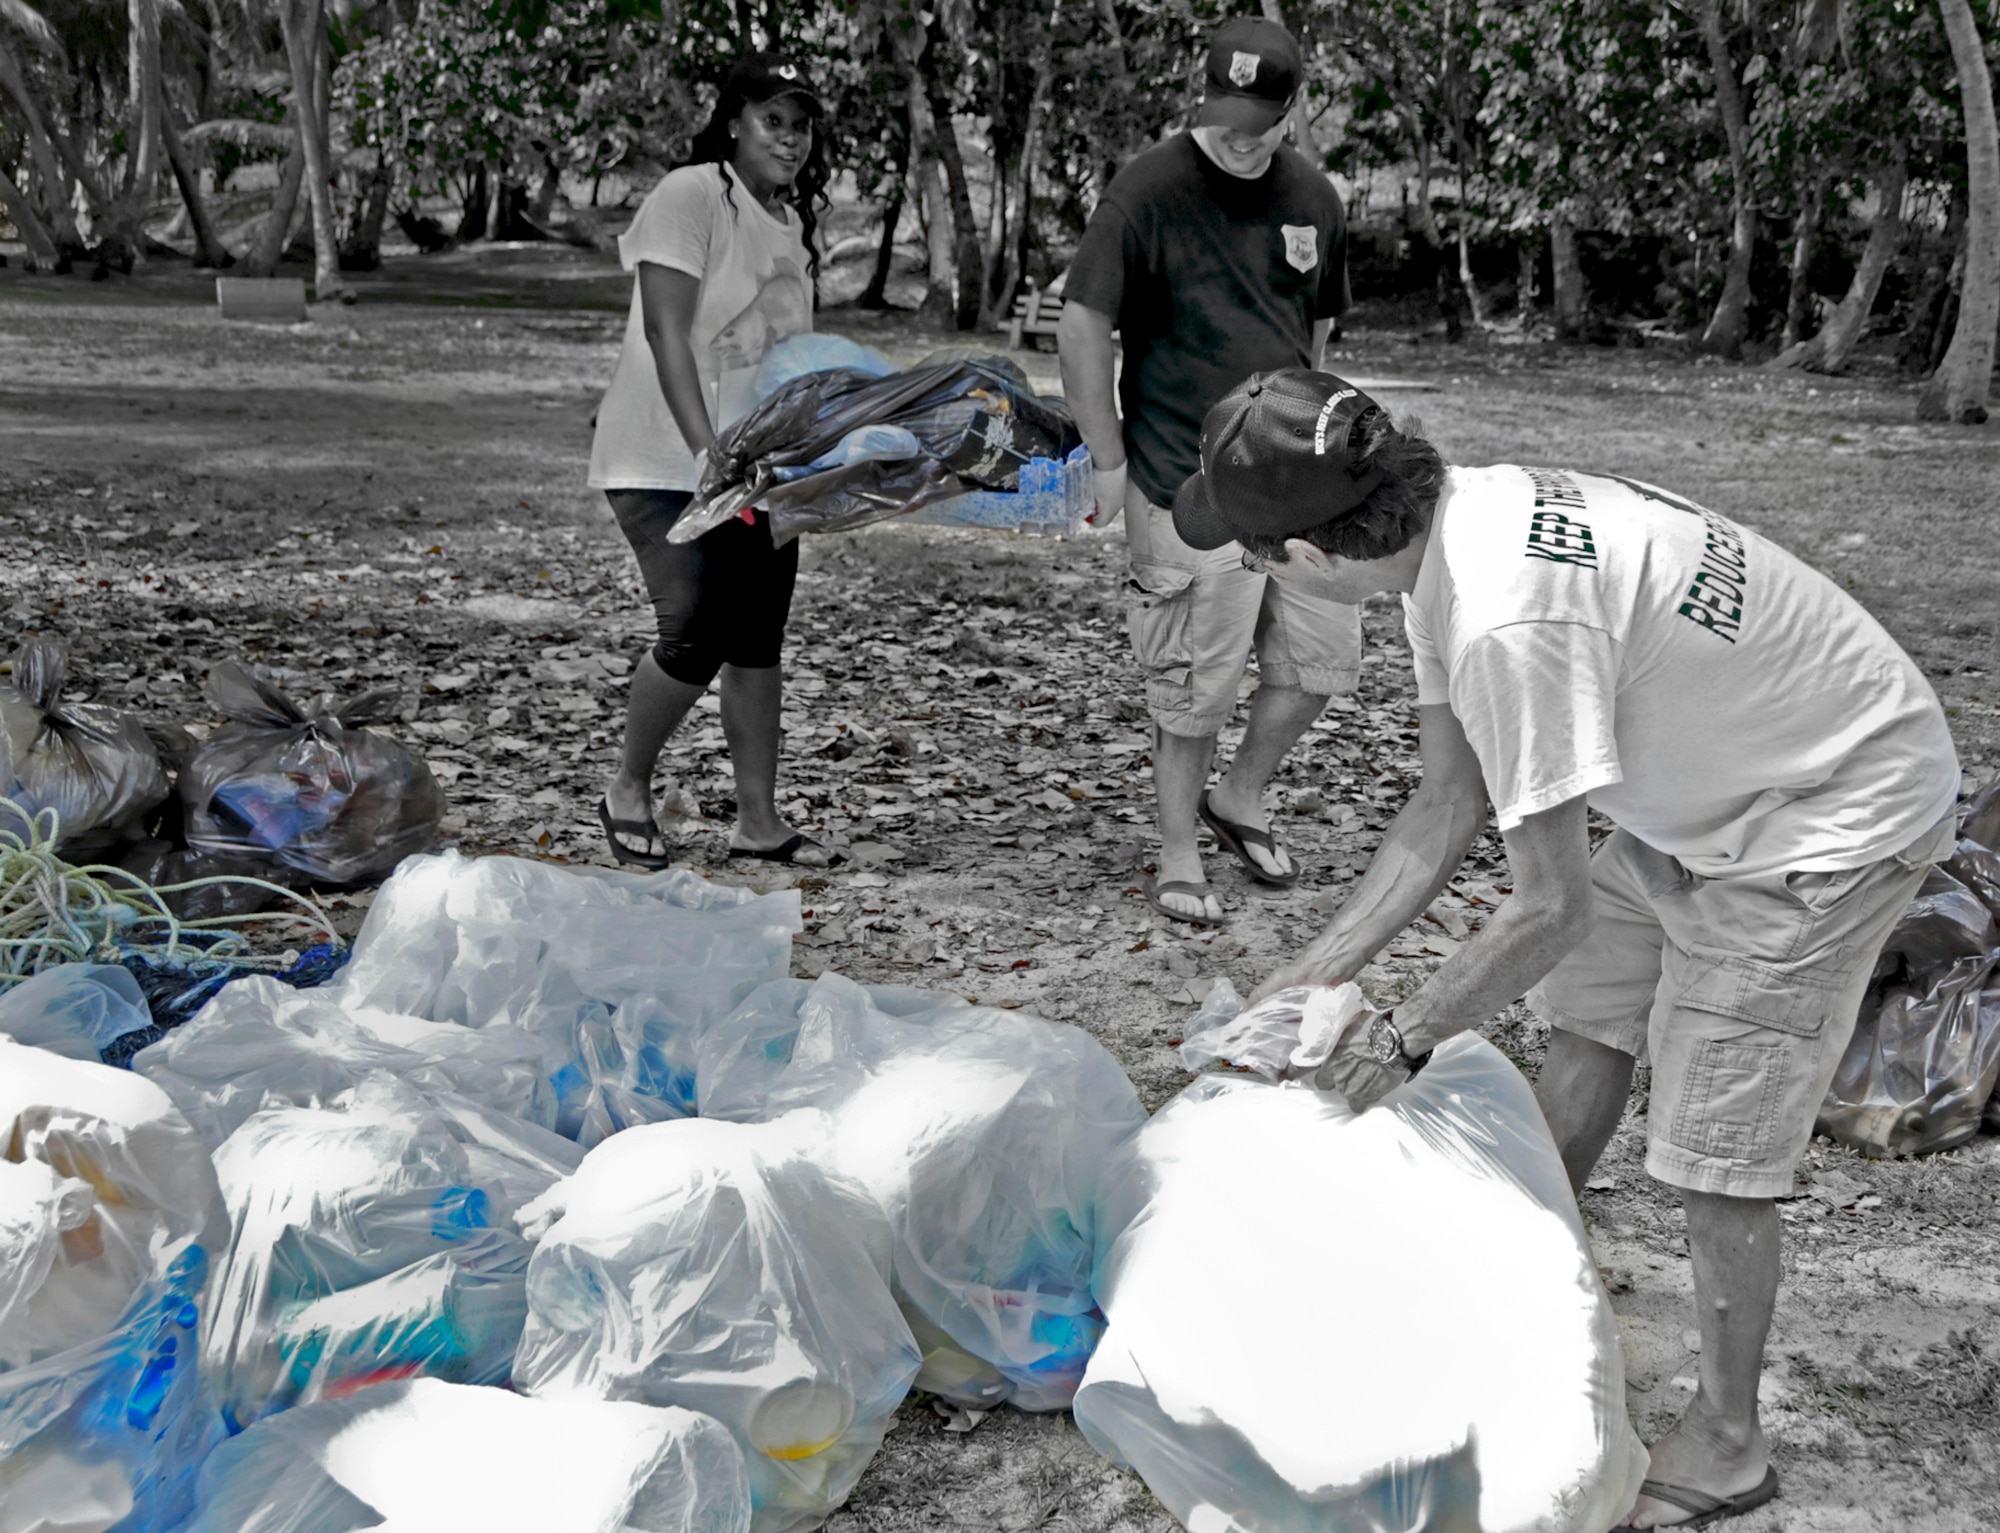 Volunteers collect and sort out recyclable material during the Earth Day cleanup on Tarague Beach at Andersen Air Force Base, Guam, April 21, 2013. Along with collecting trash, volunteers tracked the amount and brands of the waste they collected, which was sent to the U.S. Environmental Protection Agency Regions 9 for their study on sources of rubbish in oceans. (U.S. Air Force photo illustration by Airman 1st Class Marianique Santos/Released)